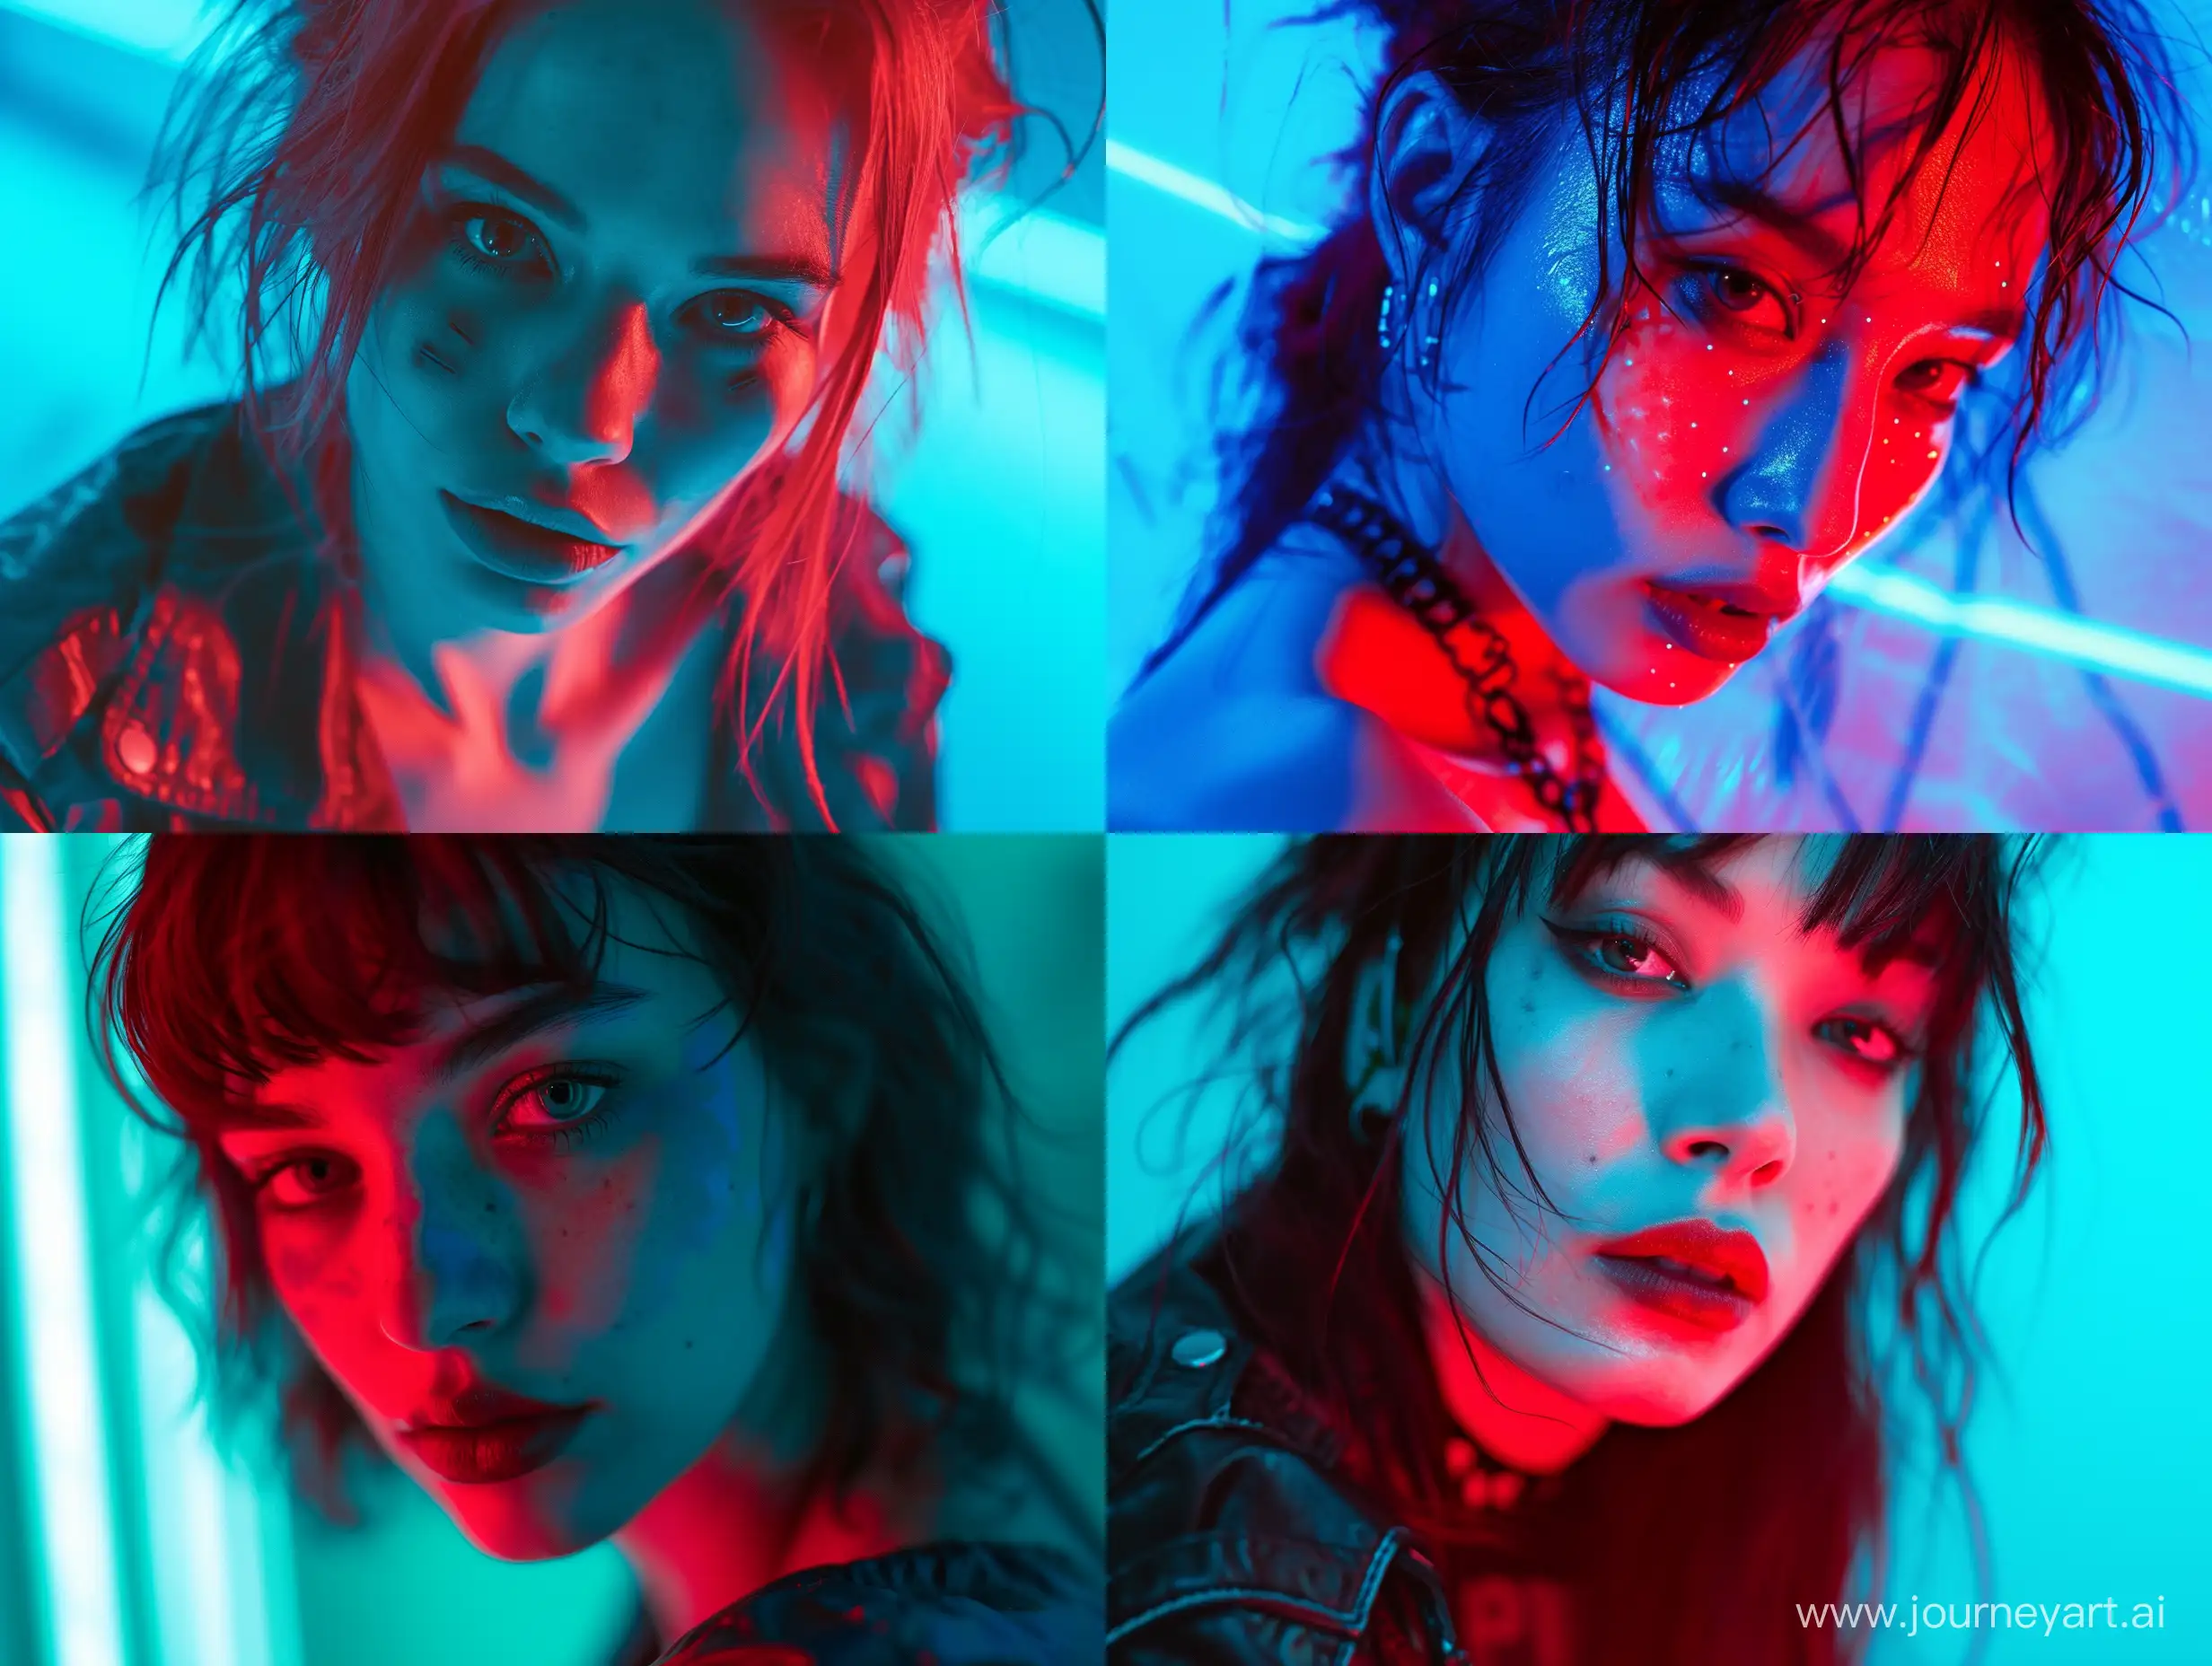 Cyberpunk-Women-in-Vibrant-Closeup-Documentary-Photography-with-Disposable-Camera-Aesthetic